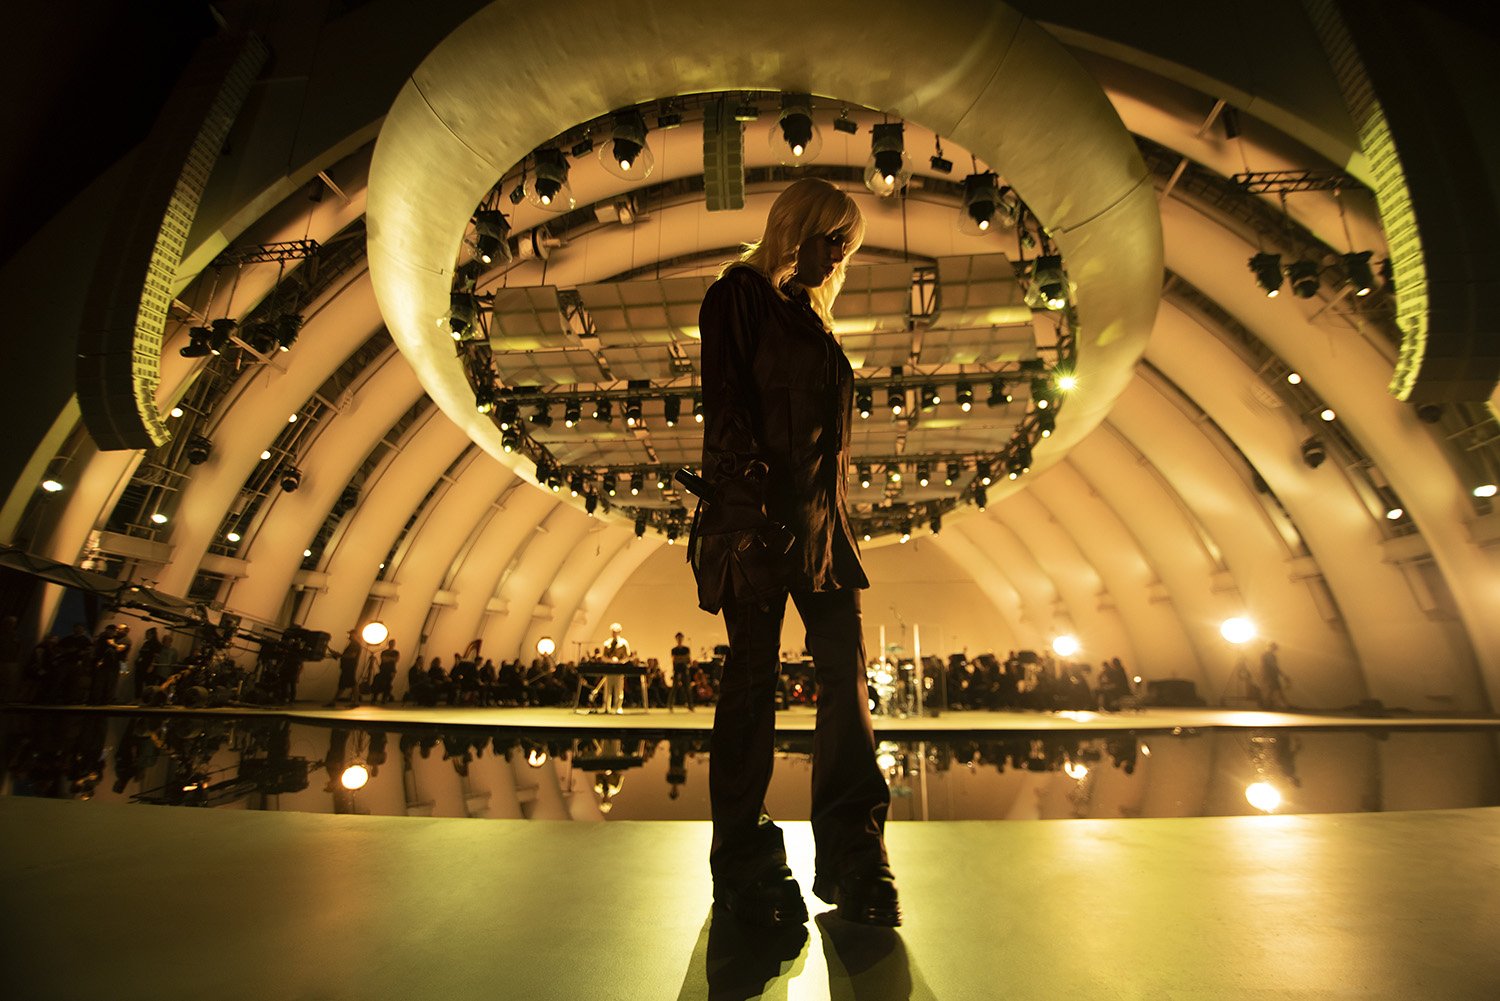 Billie Eilish stands on stage at The Hollywood Bowl in Los Angeles during her 'Happier Than Ever: A Love Letter to Los Angeles' Disney+ concert film